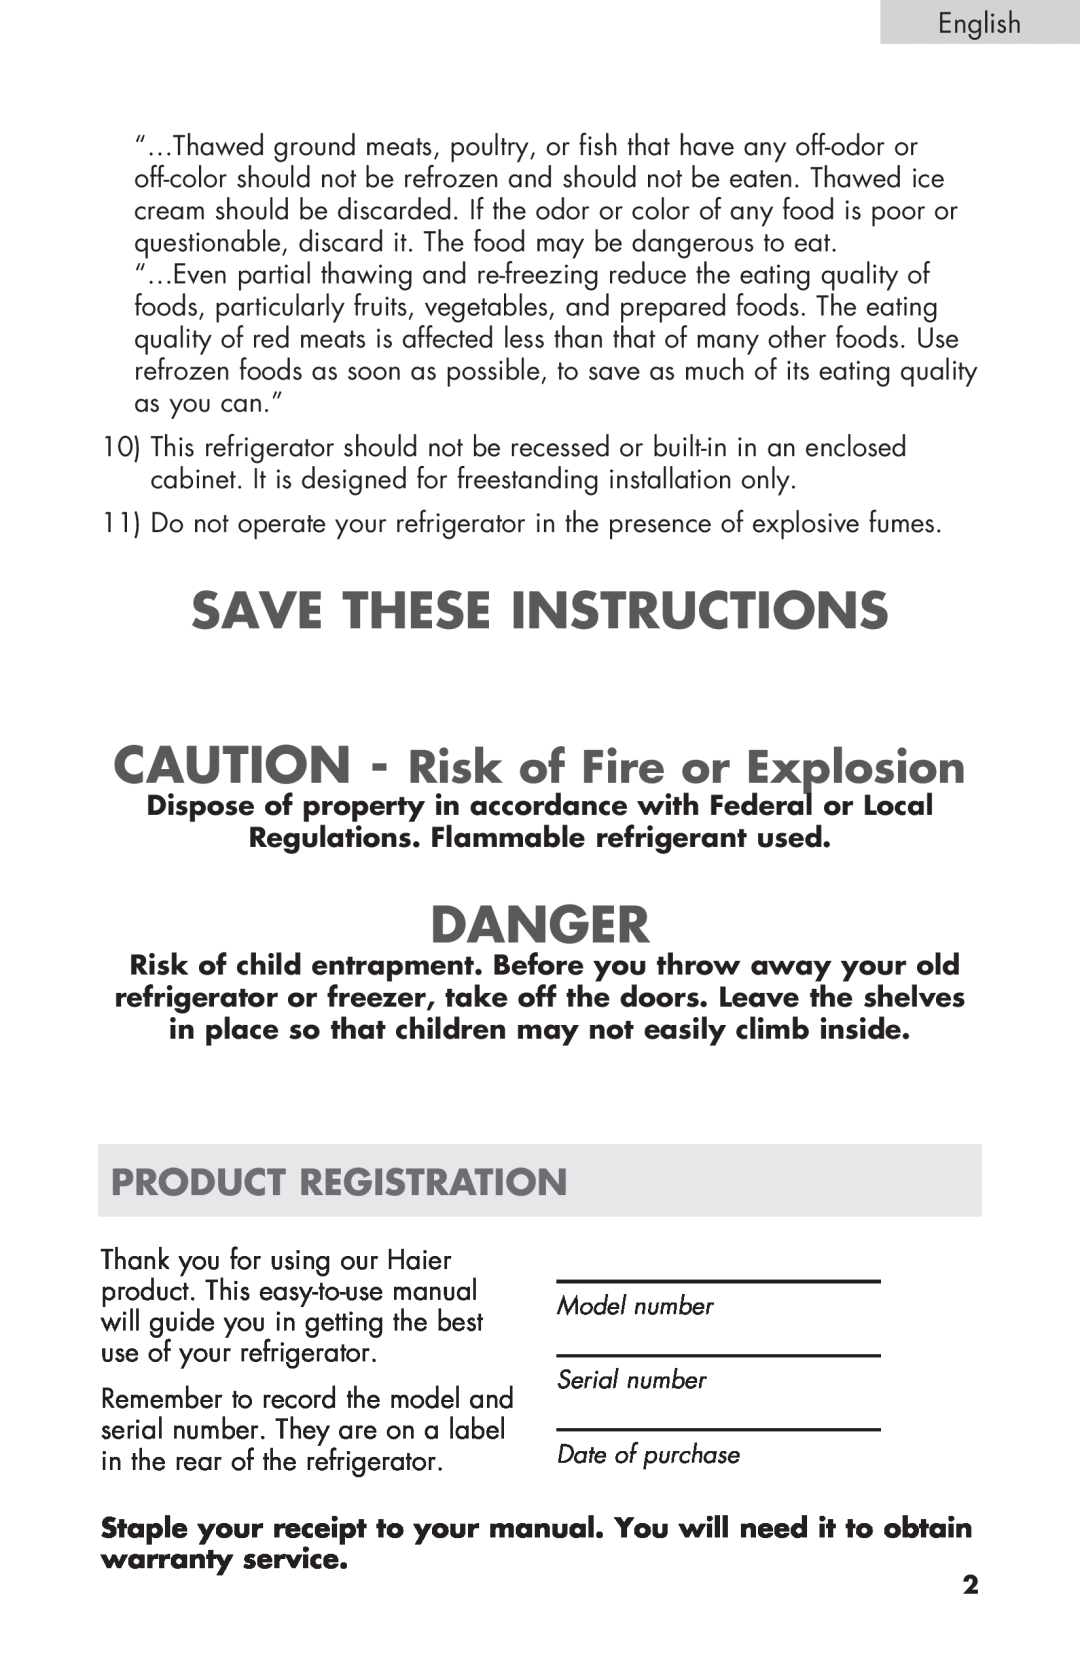 Haier HC27SF22RB user manual Save These Instructions, Danger, CAUTION - Risk of Fire or Explosion, Product Registration 